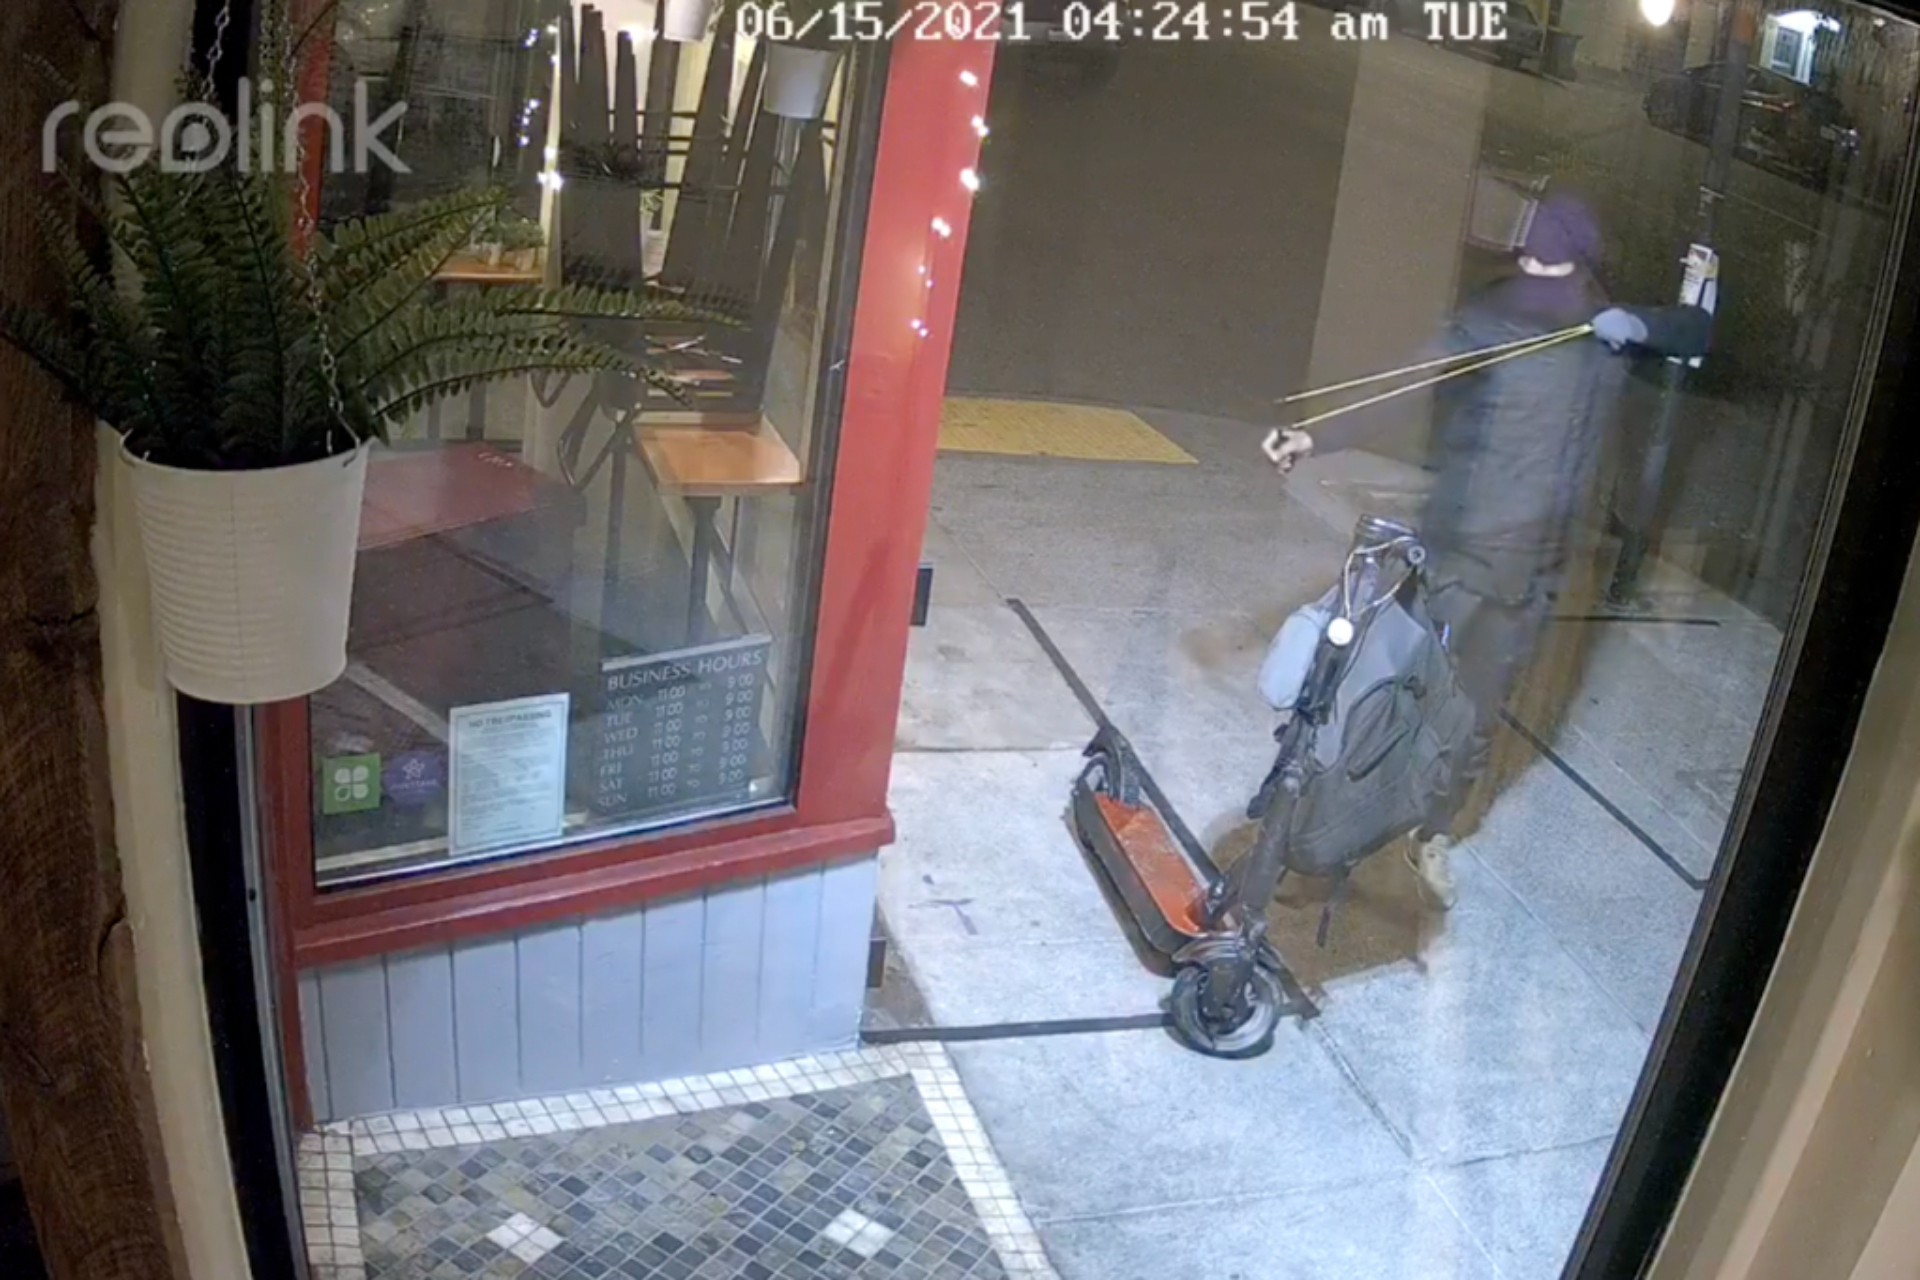 Surveillance footage from outside a storefront shows a man pulling back a slingshot.